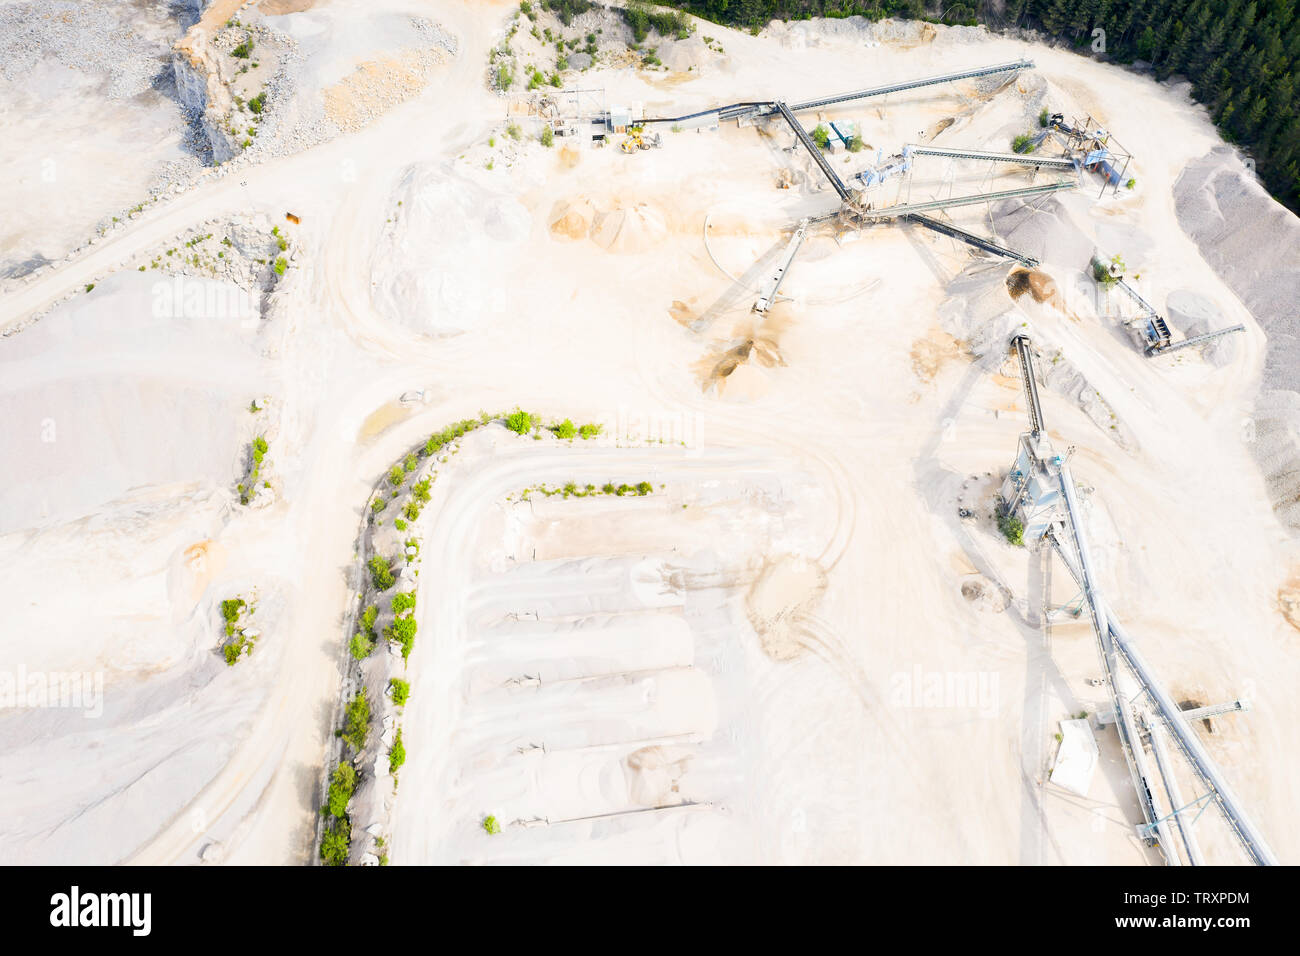 Aerial of stone crushers and sorters in a quarry landscape. Heaps of gravel and stones in the pit and many conveyor belts radiating out from the crush Stock Photo